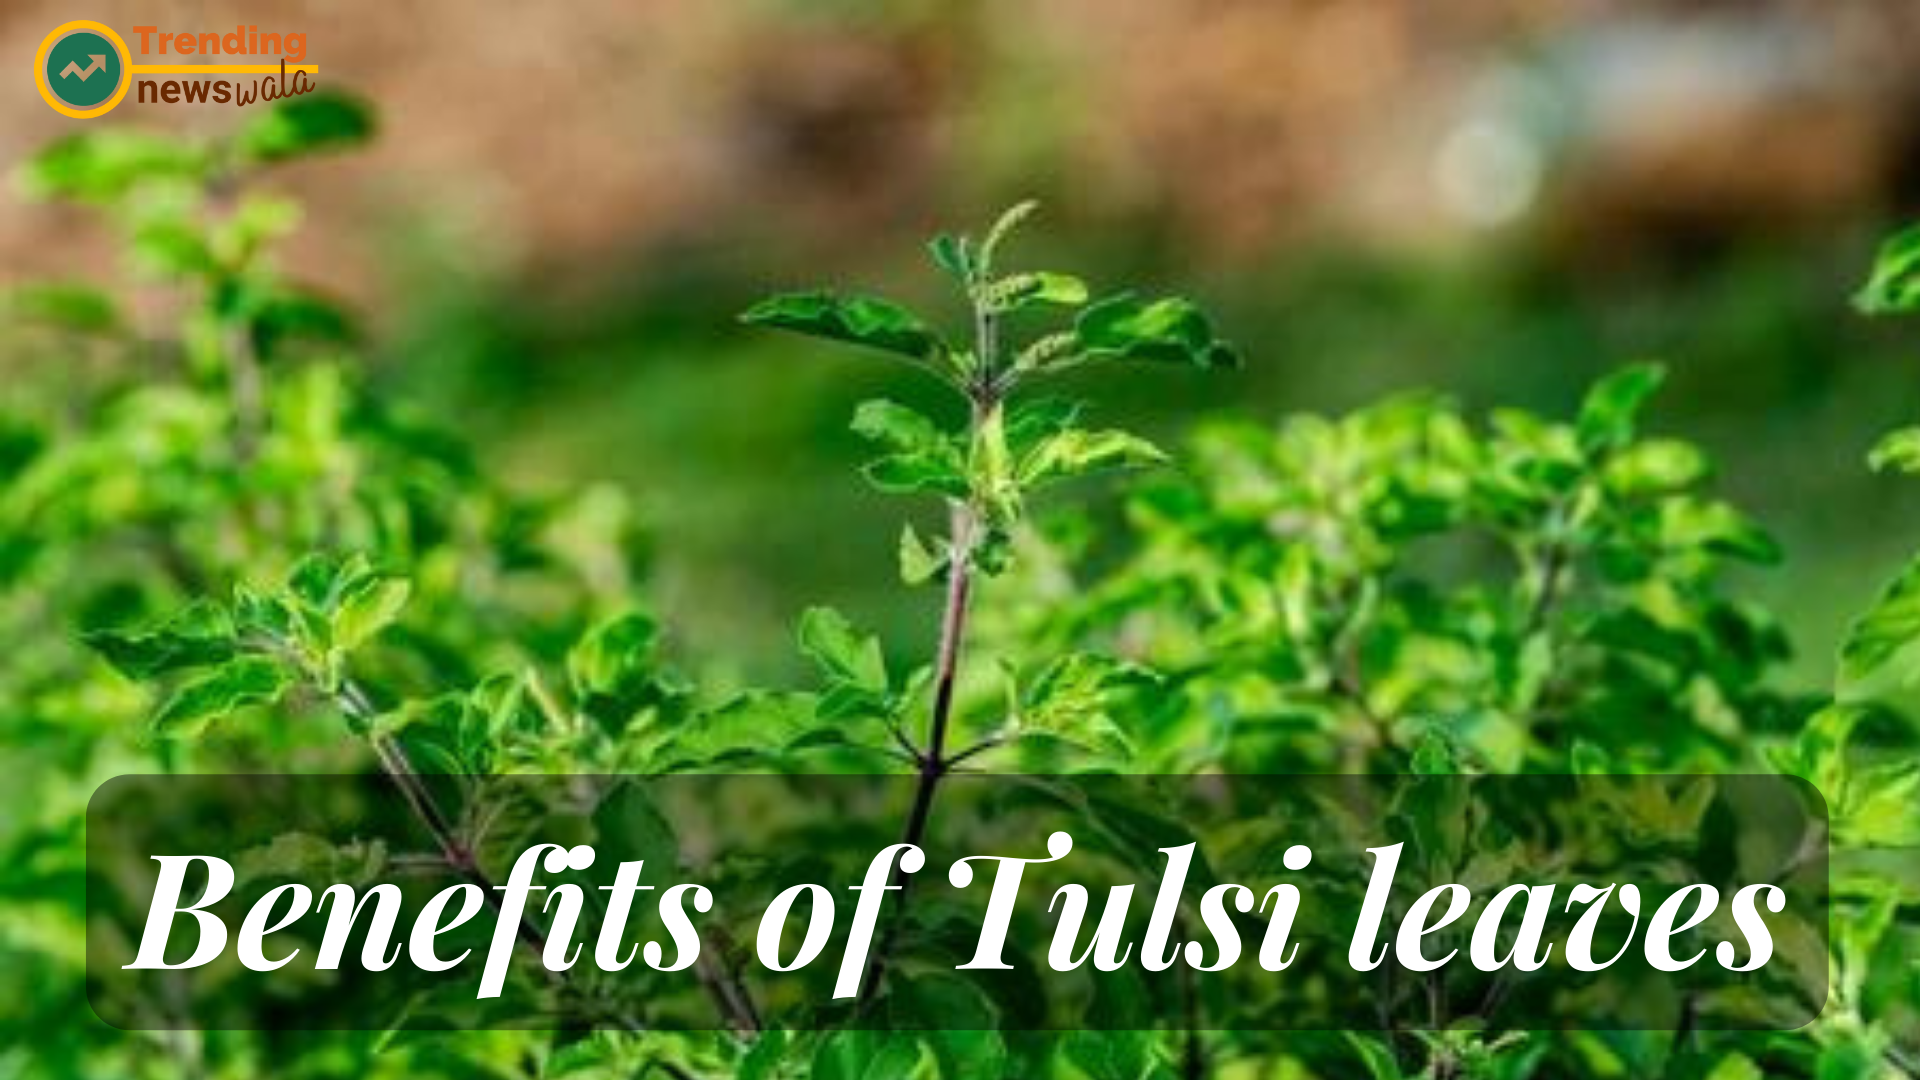 10 Benefits of Tulsi leaves